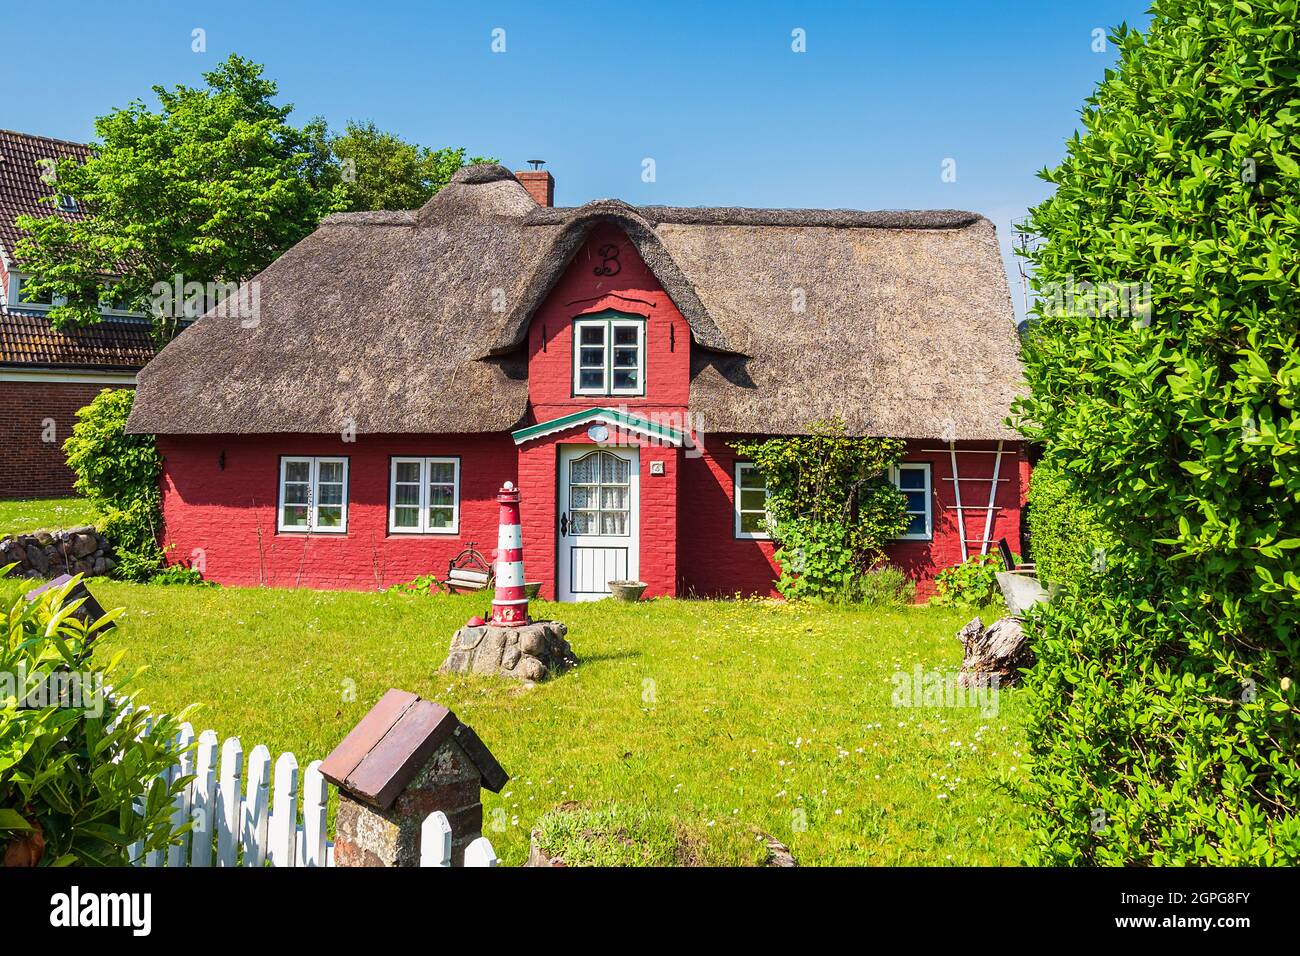 Historical building in Norddorf on the North Sea island Amrum, Germany. Stock Photo